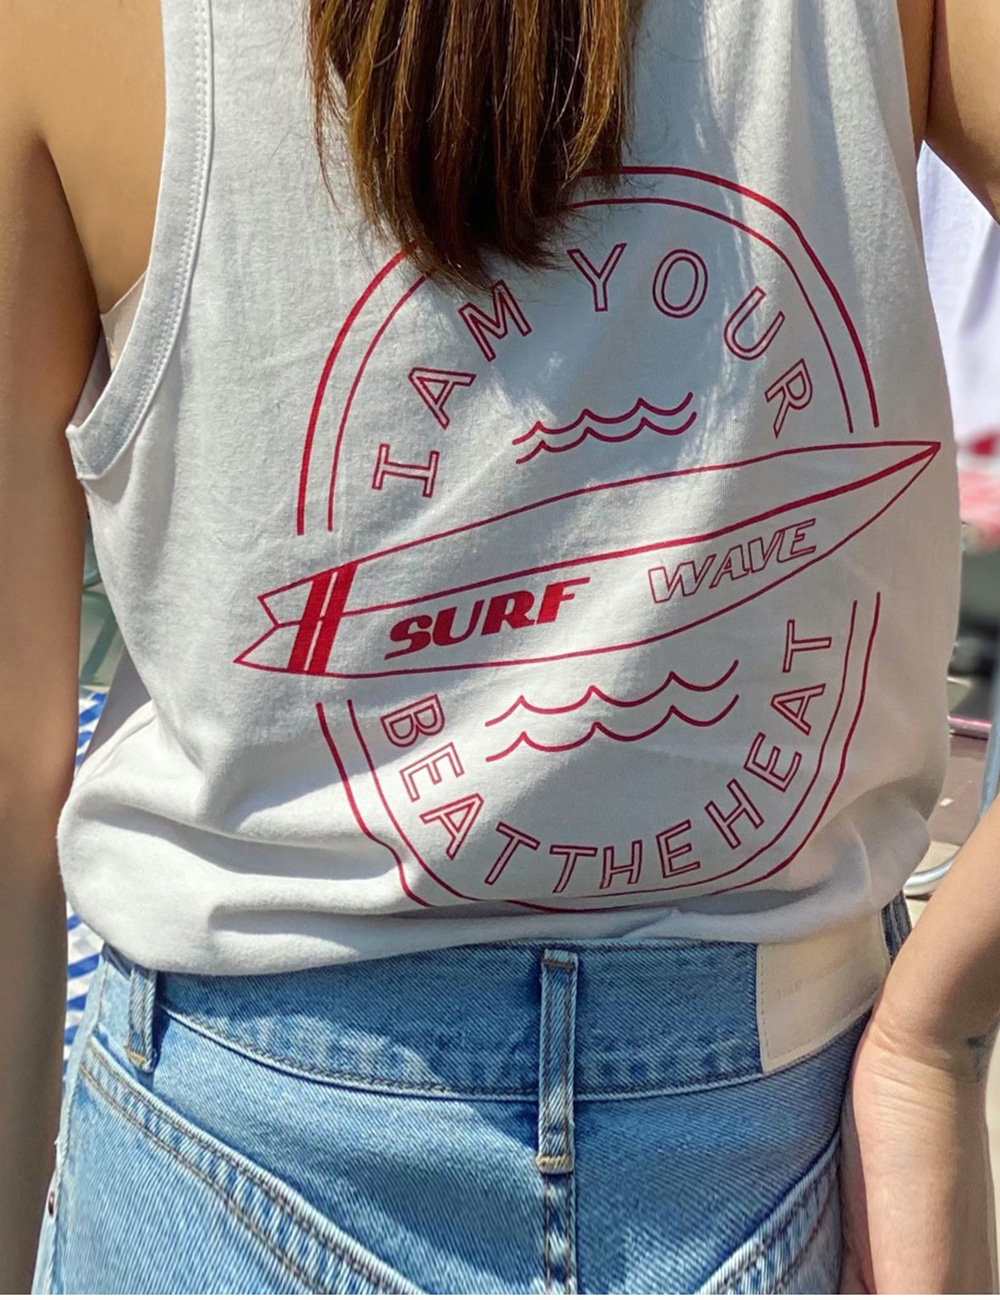 50%--Surf wave Sleeveless (off white&amp;red)